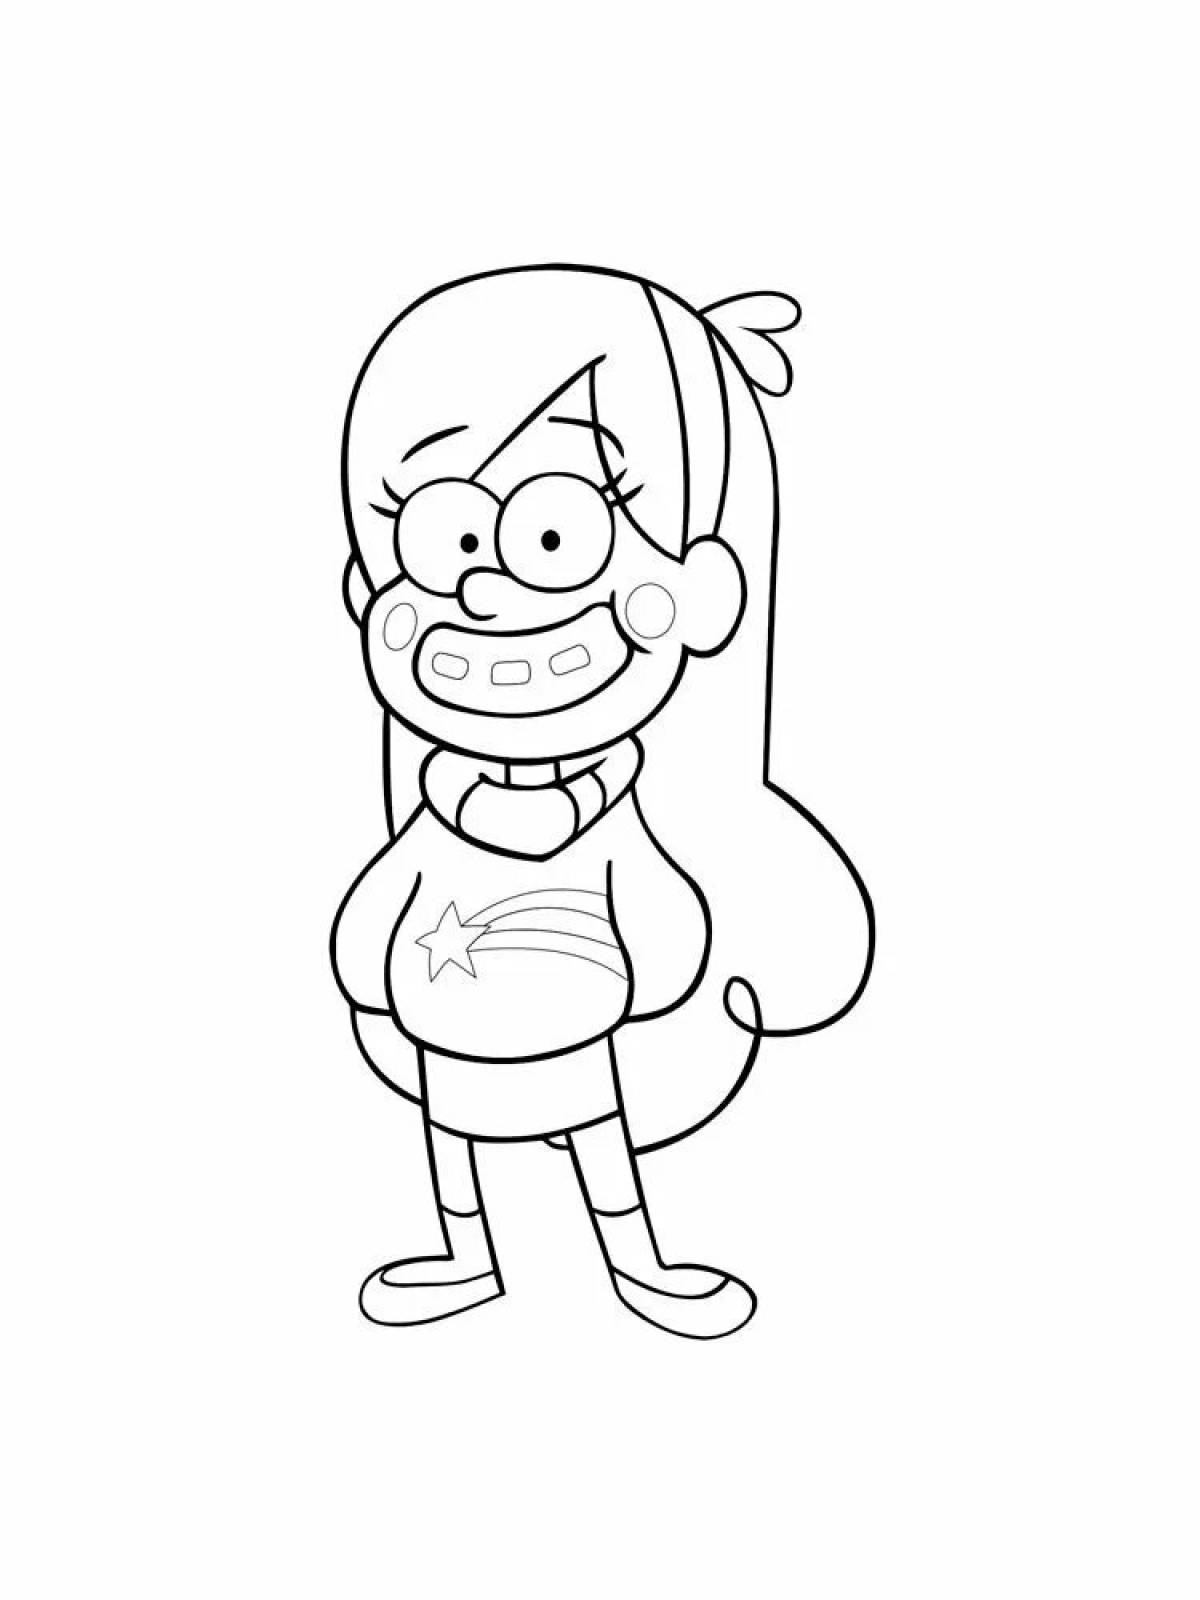 Amazing coloring pages dipper and mabel